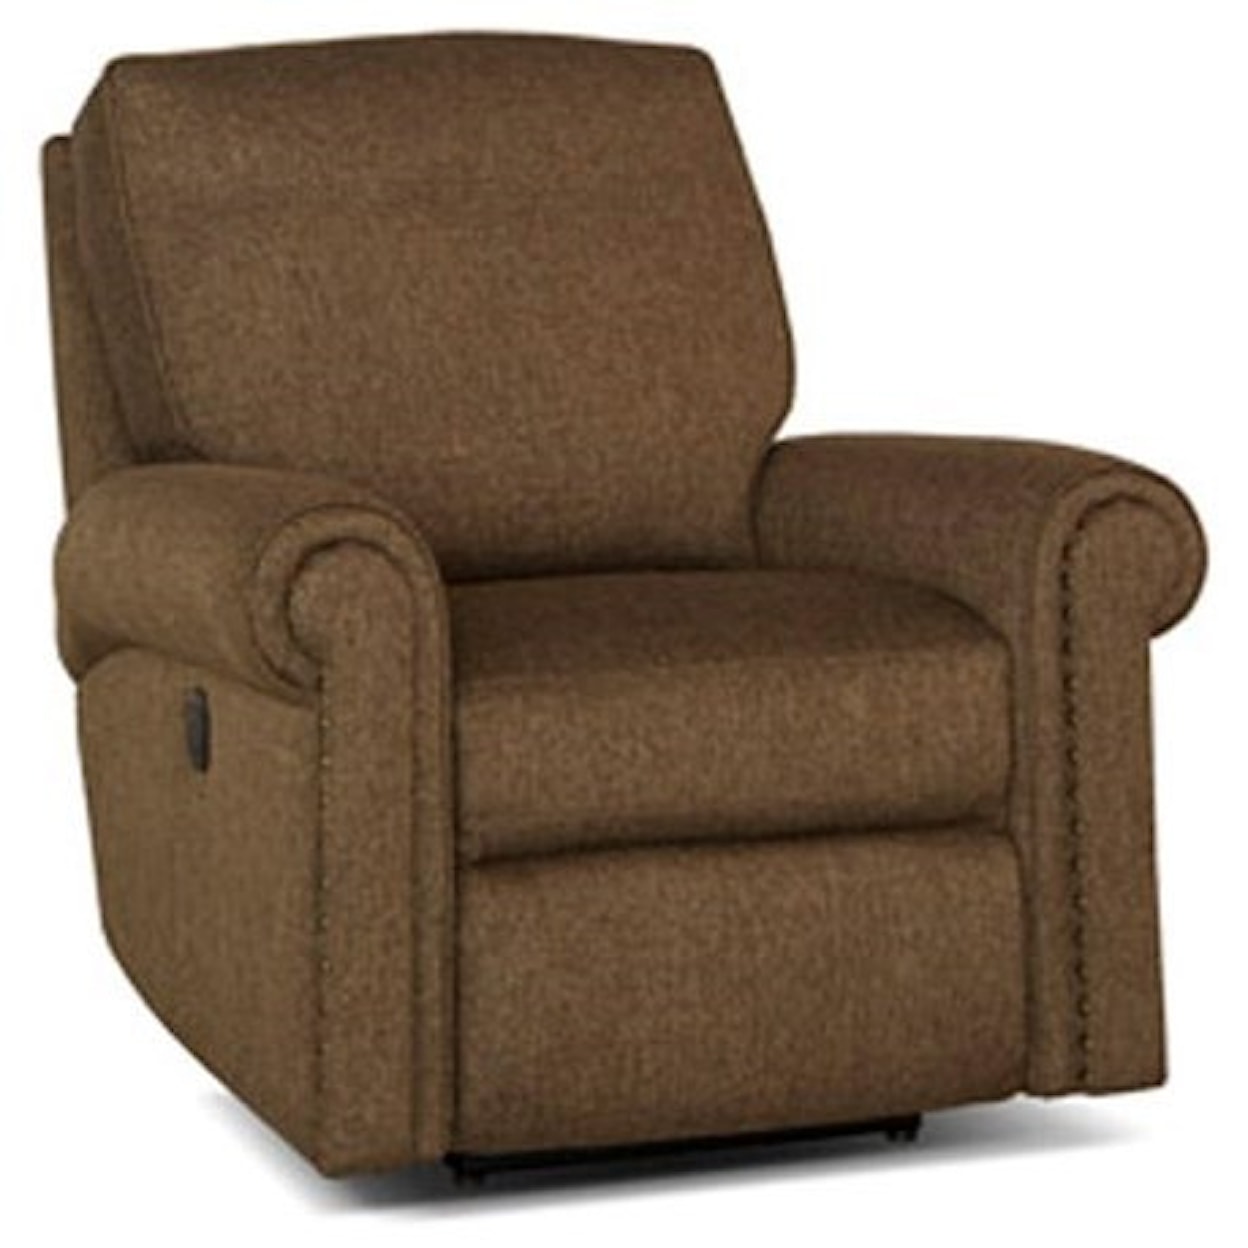 Smith Brothers 420 Motorized Reclining Chair